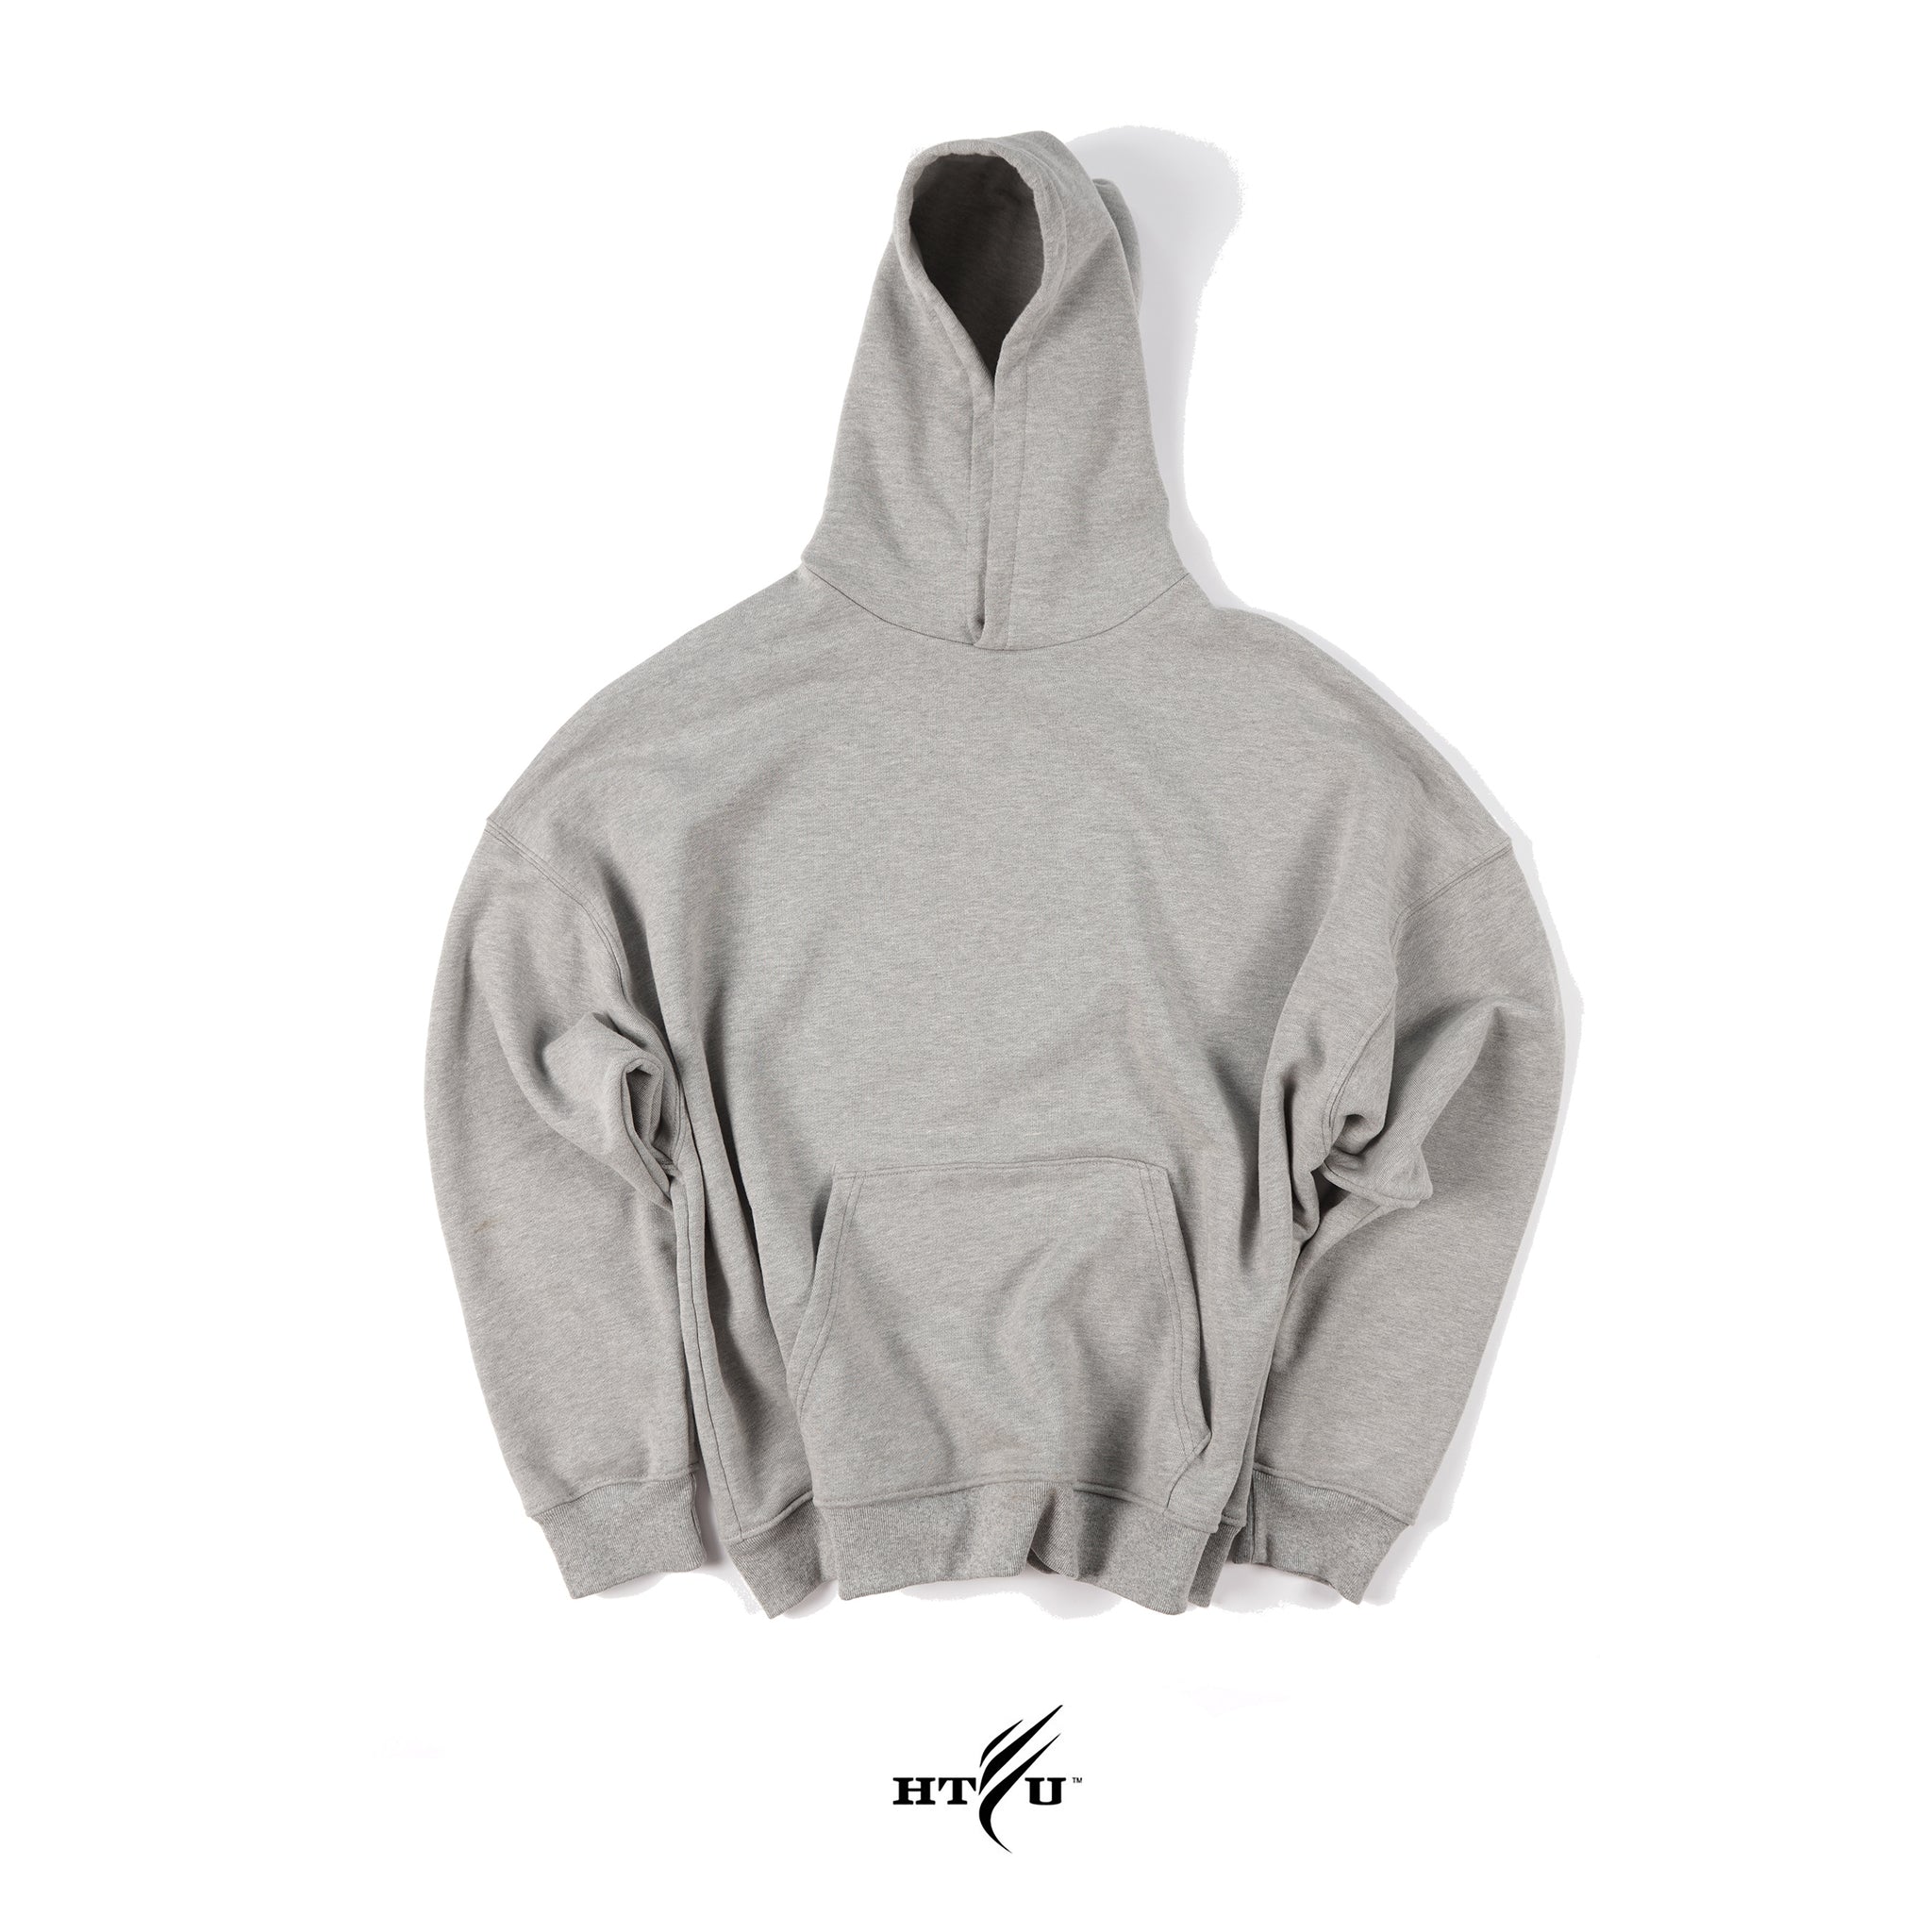 Easy Living French Terry Hoodie - Dusted Heather Gray - All